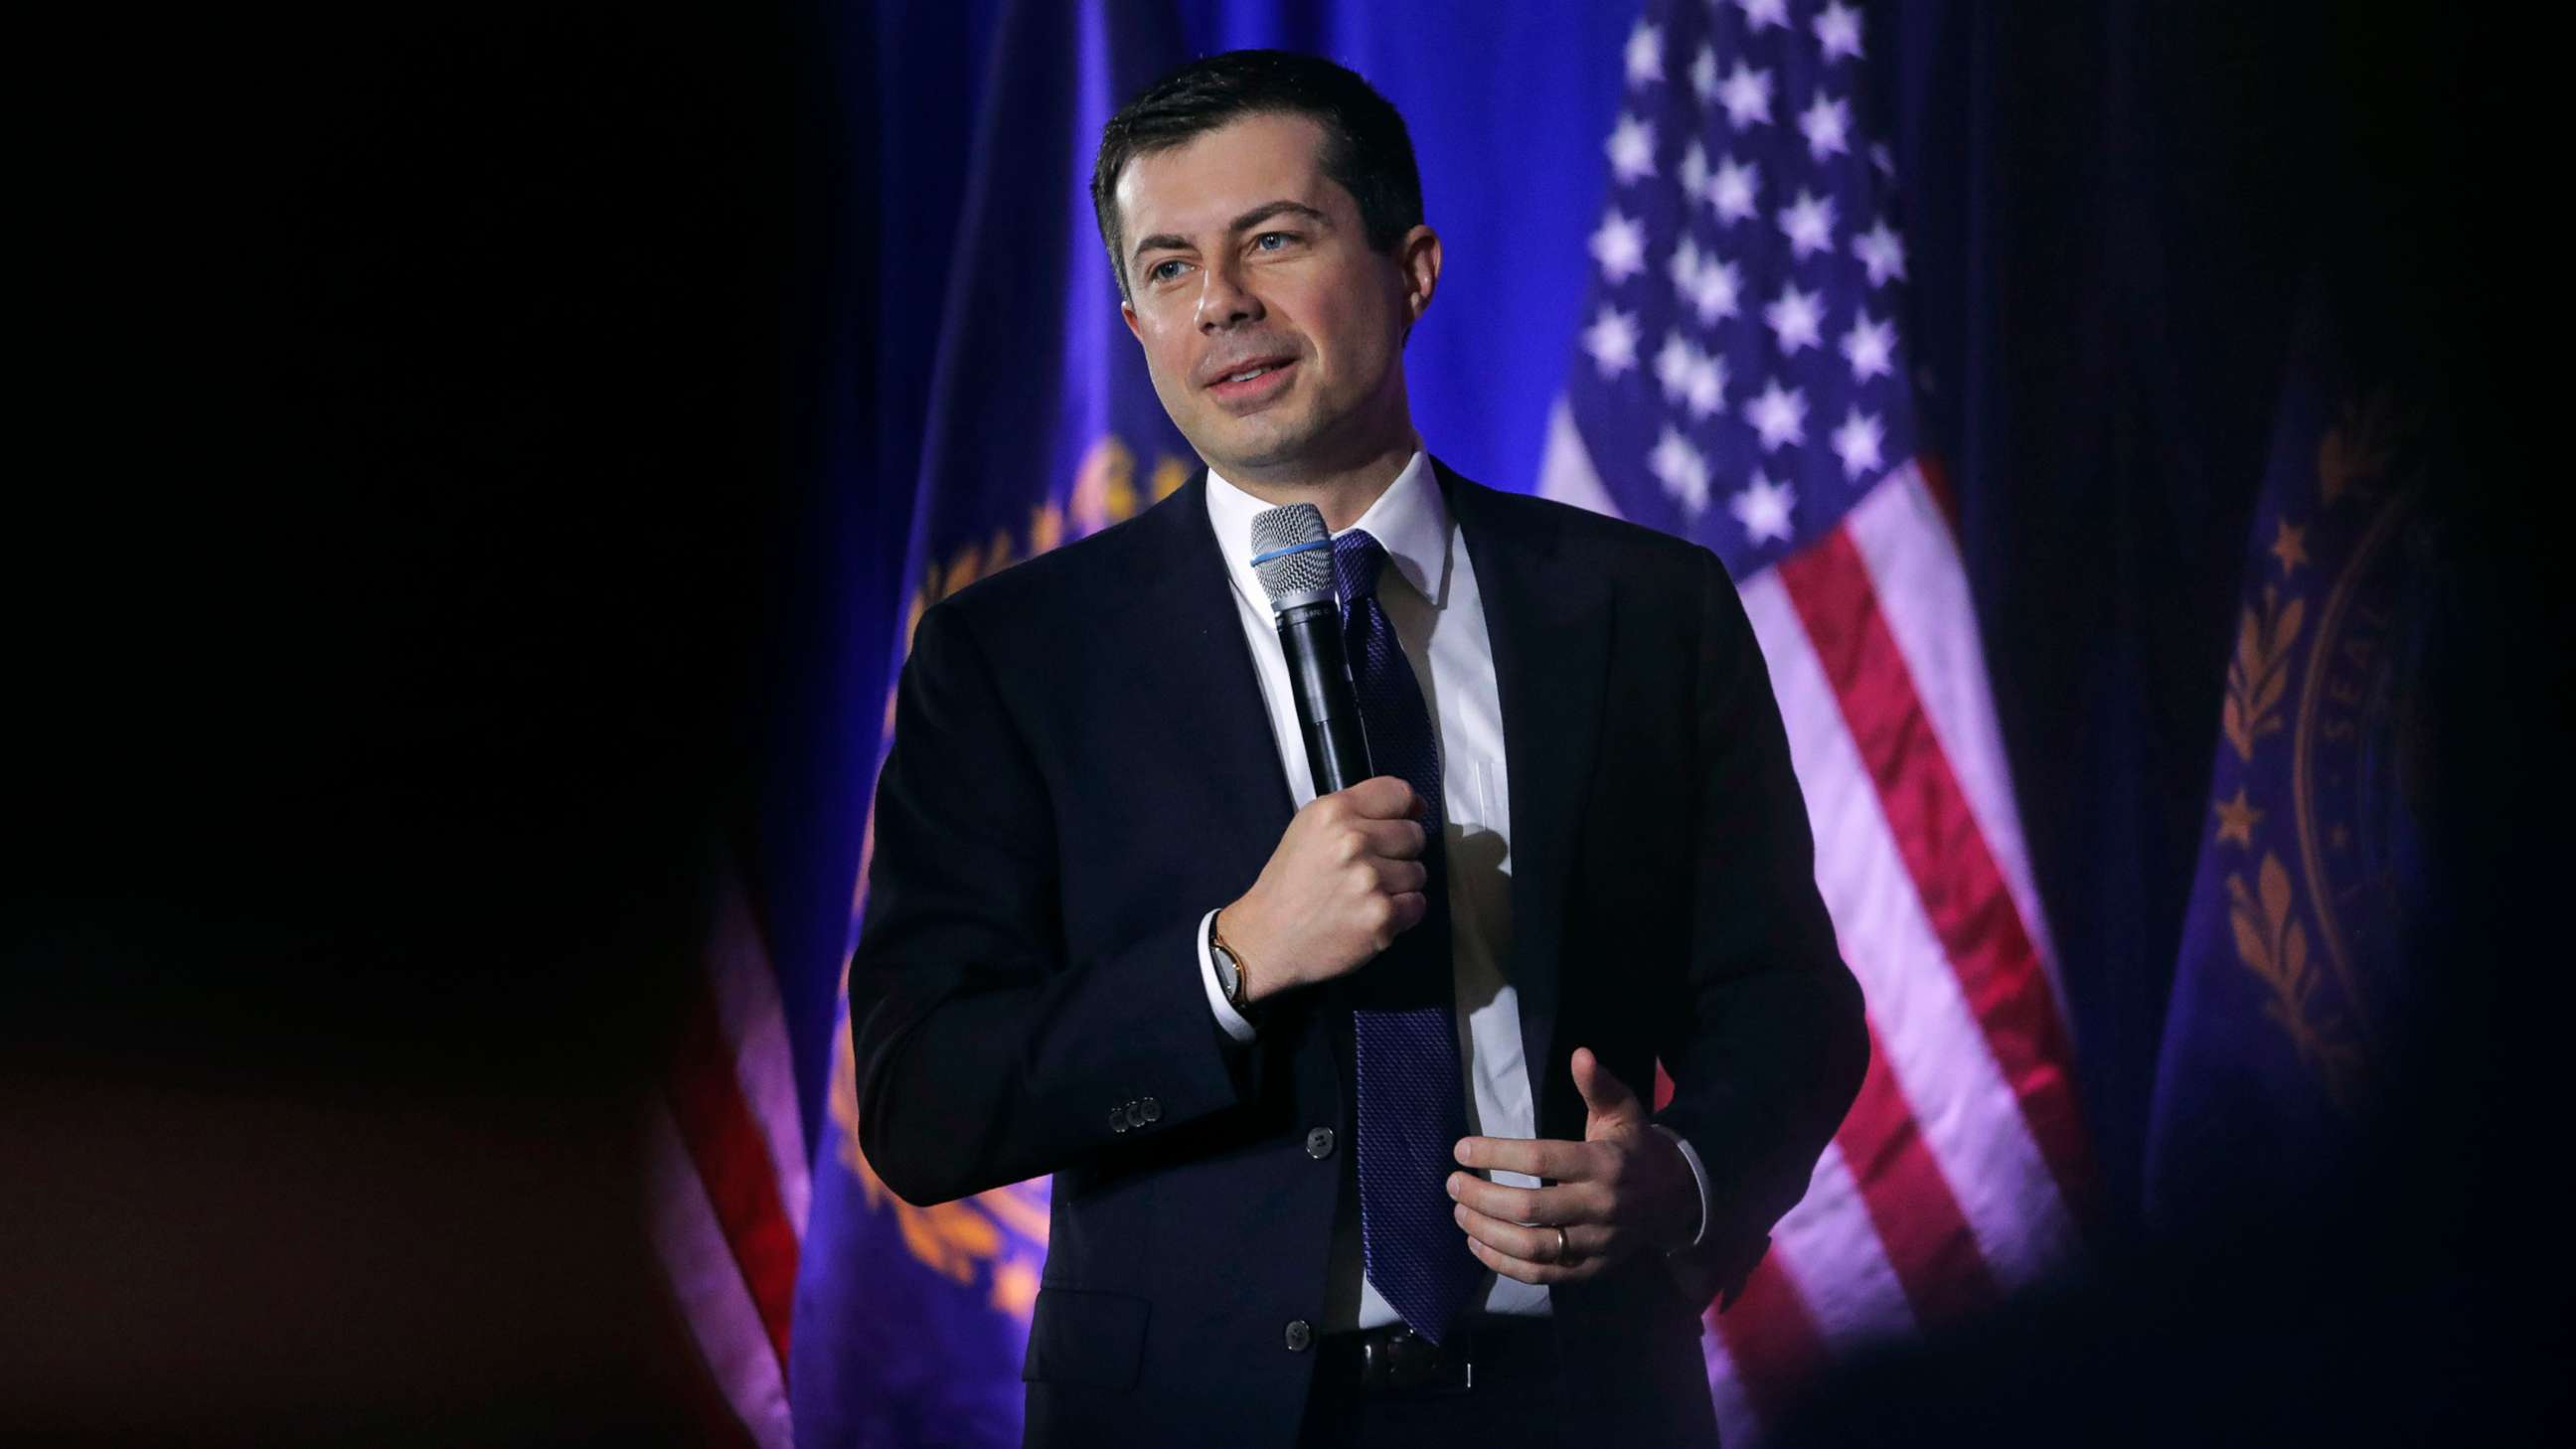 PHOTO: Democratic presidential candidate and former South Bend Mayor Pete Buttigieg addresses a gathering during a campaign stop in Concord, N.H., Jan. 17, 2020.